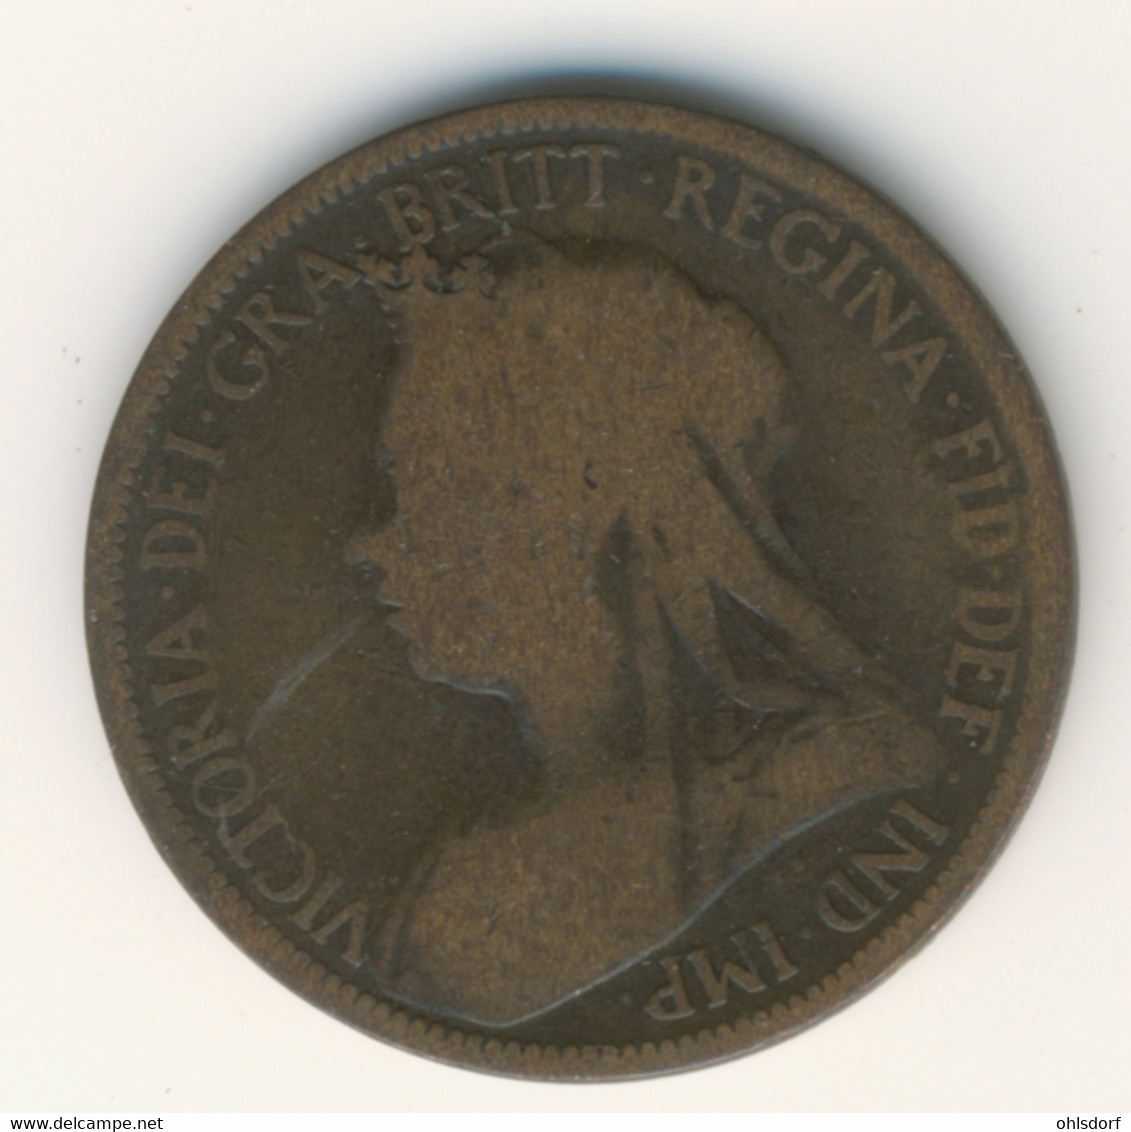 GREAT BRITAIN 1901: 1/2 Penny, KM 789 - C. 1/2 Penny